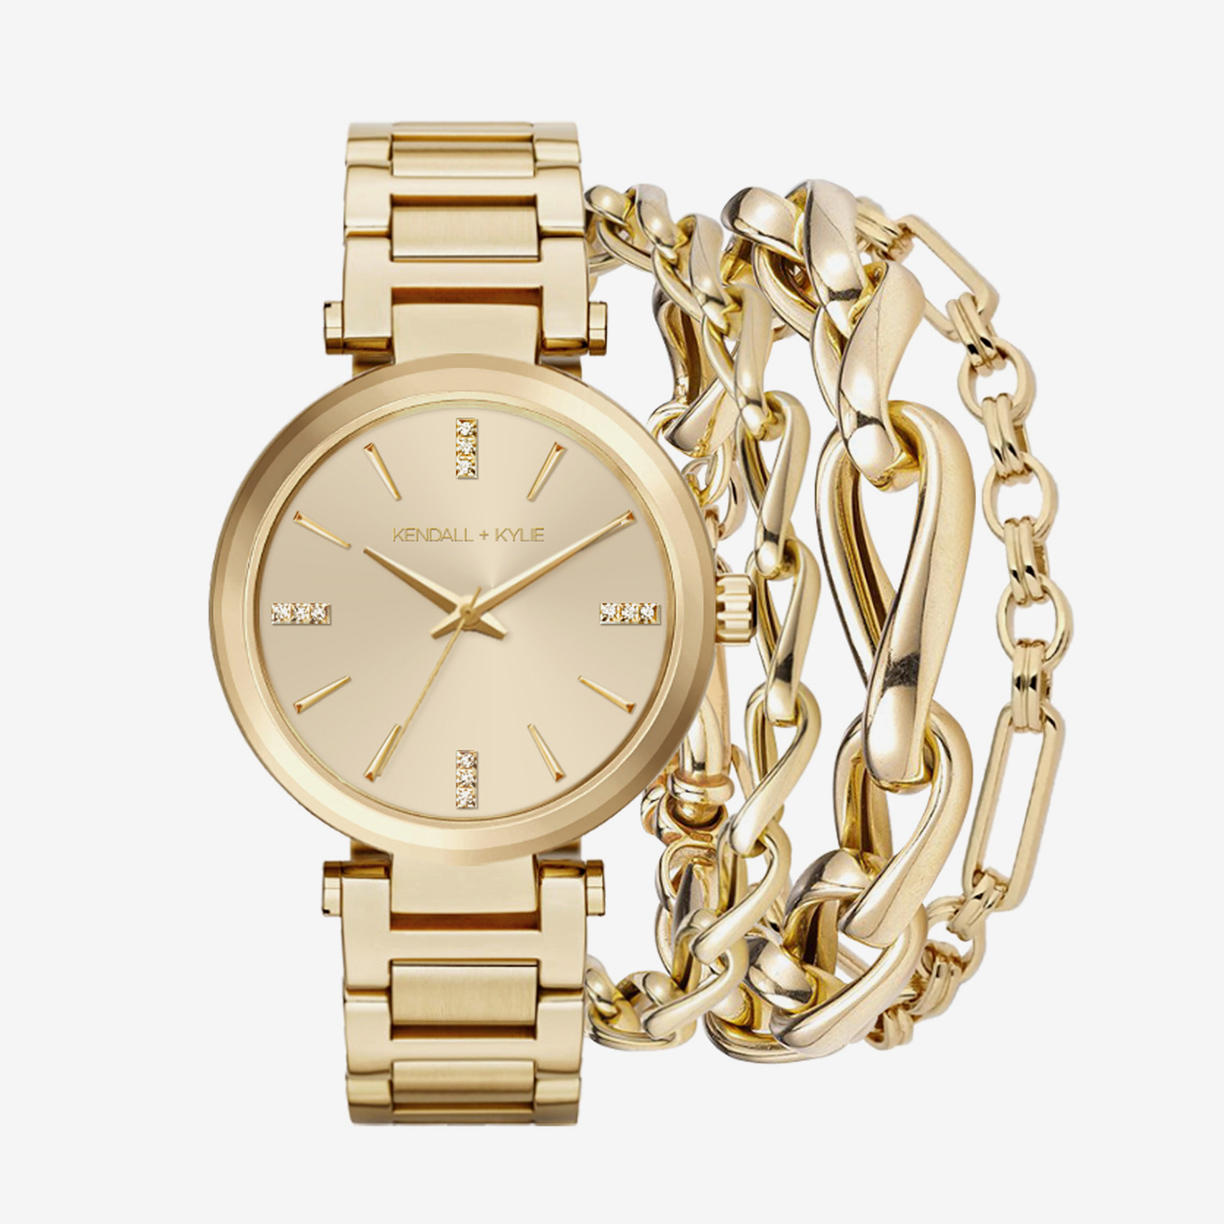 Jewelry & Watch Gifts for Graduates Up to 60% Off